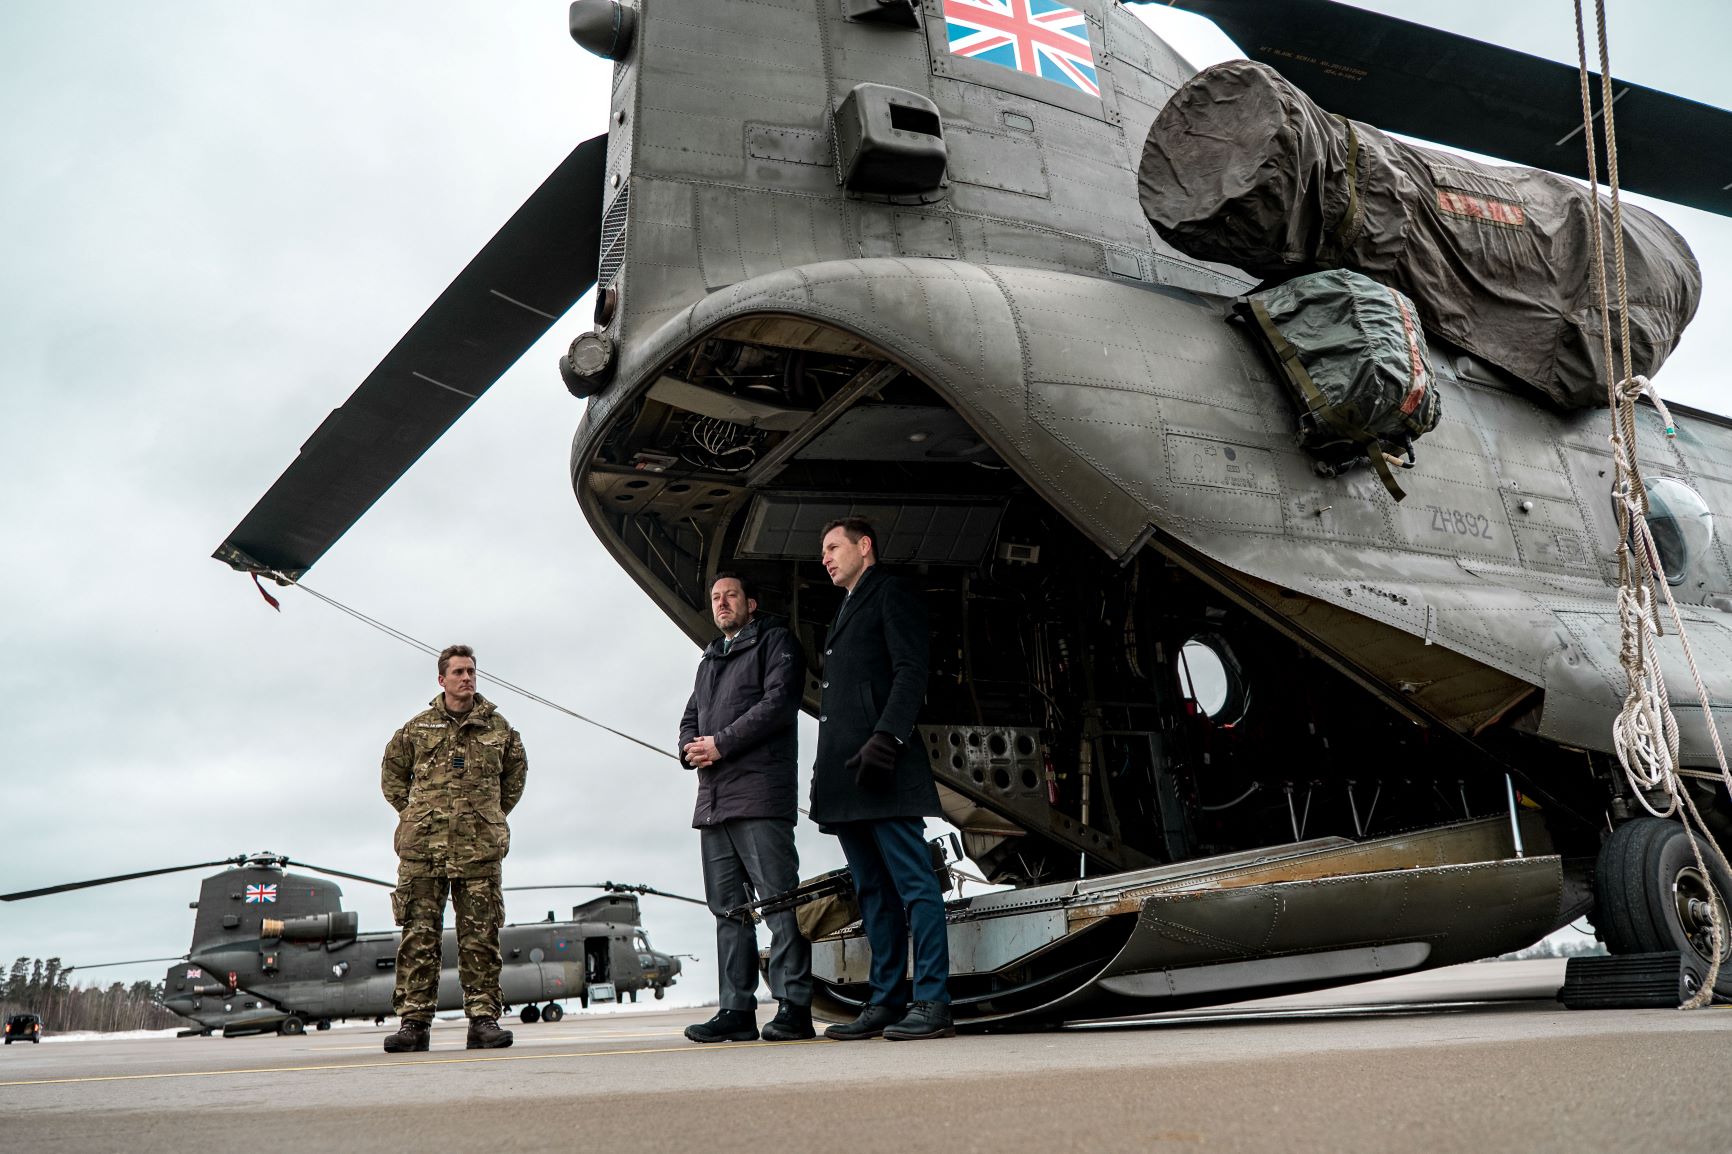 Image shows RAF aviators and Chinooks on the airfield.